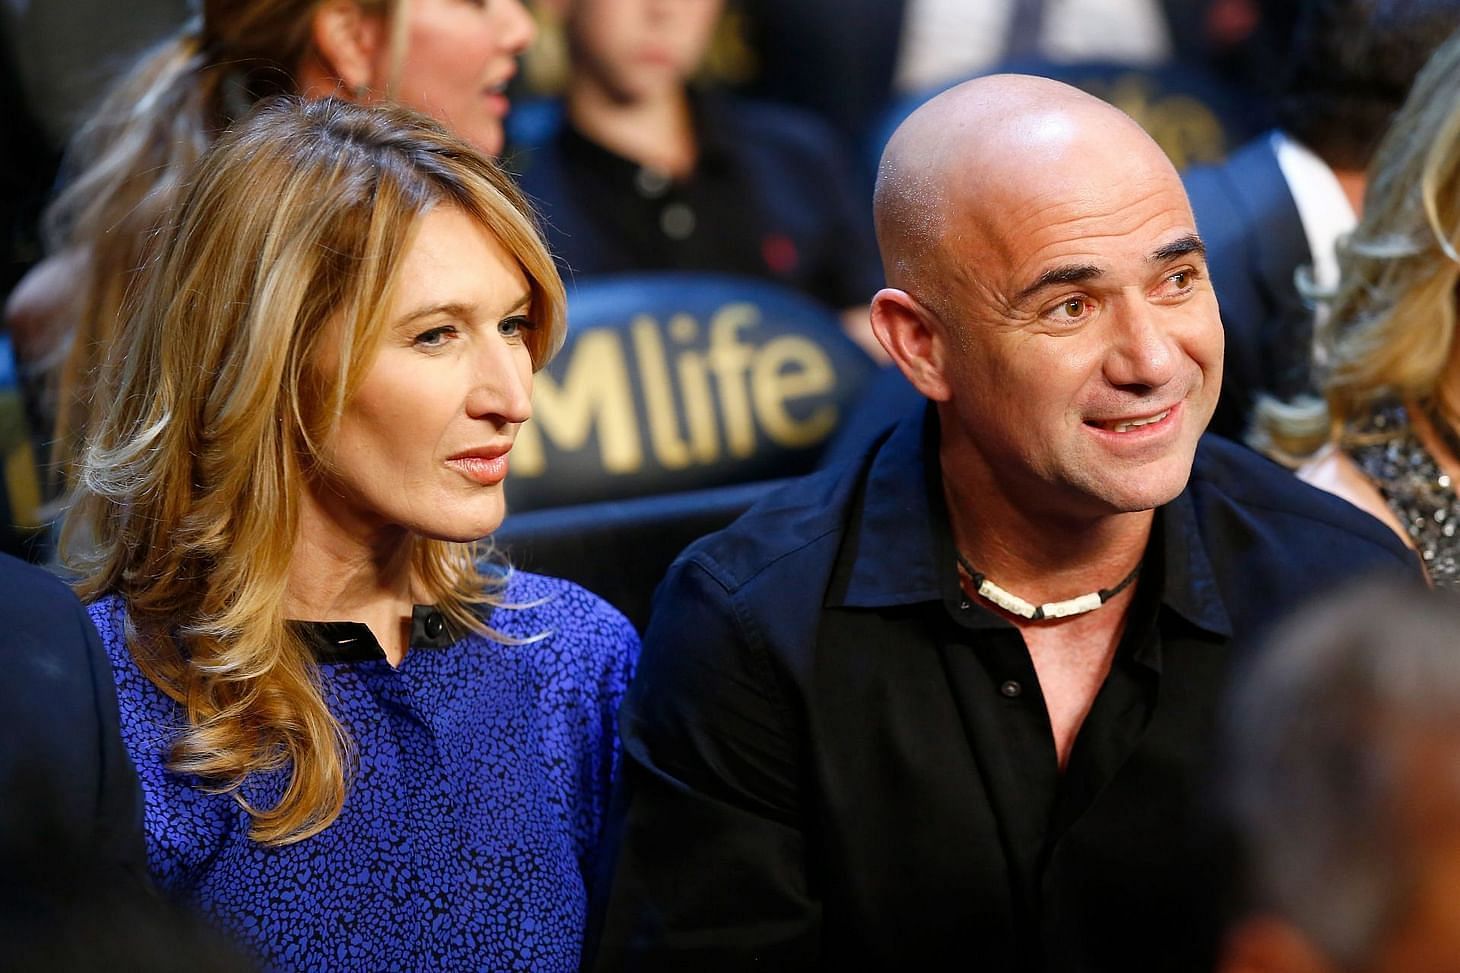 Steffi Graf (L) and Andre Agassi at the MGM Grand Garden Arena in Las Vegas